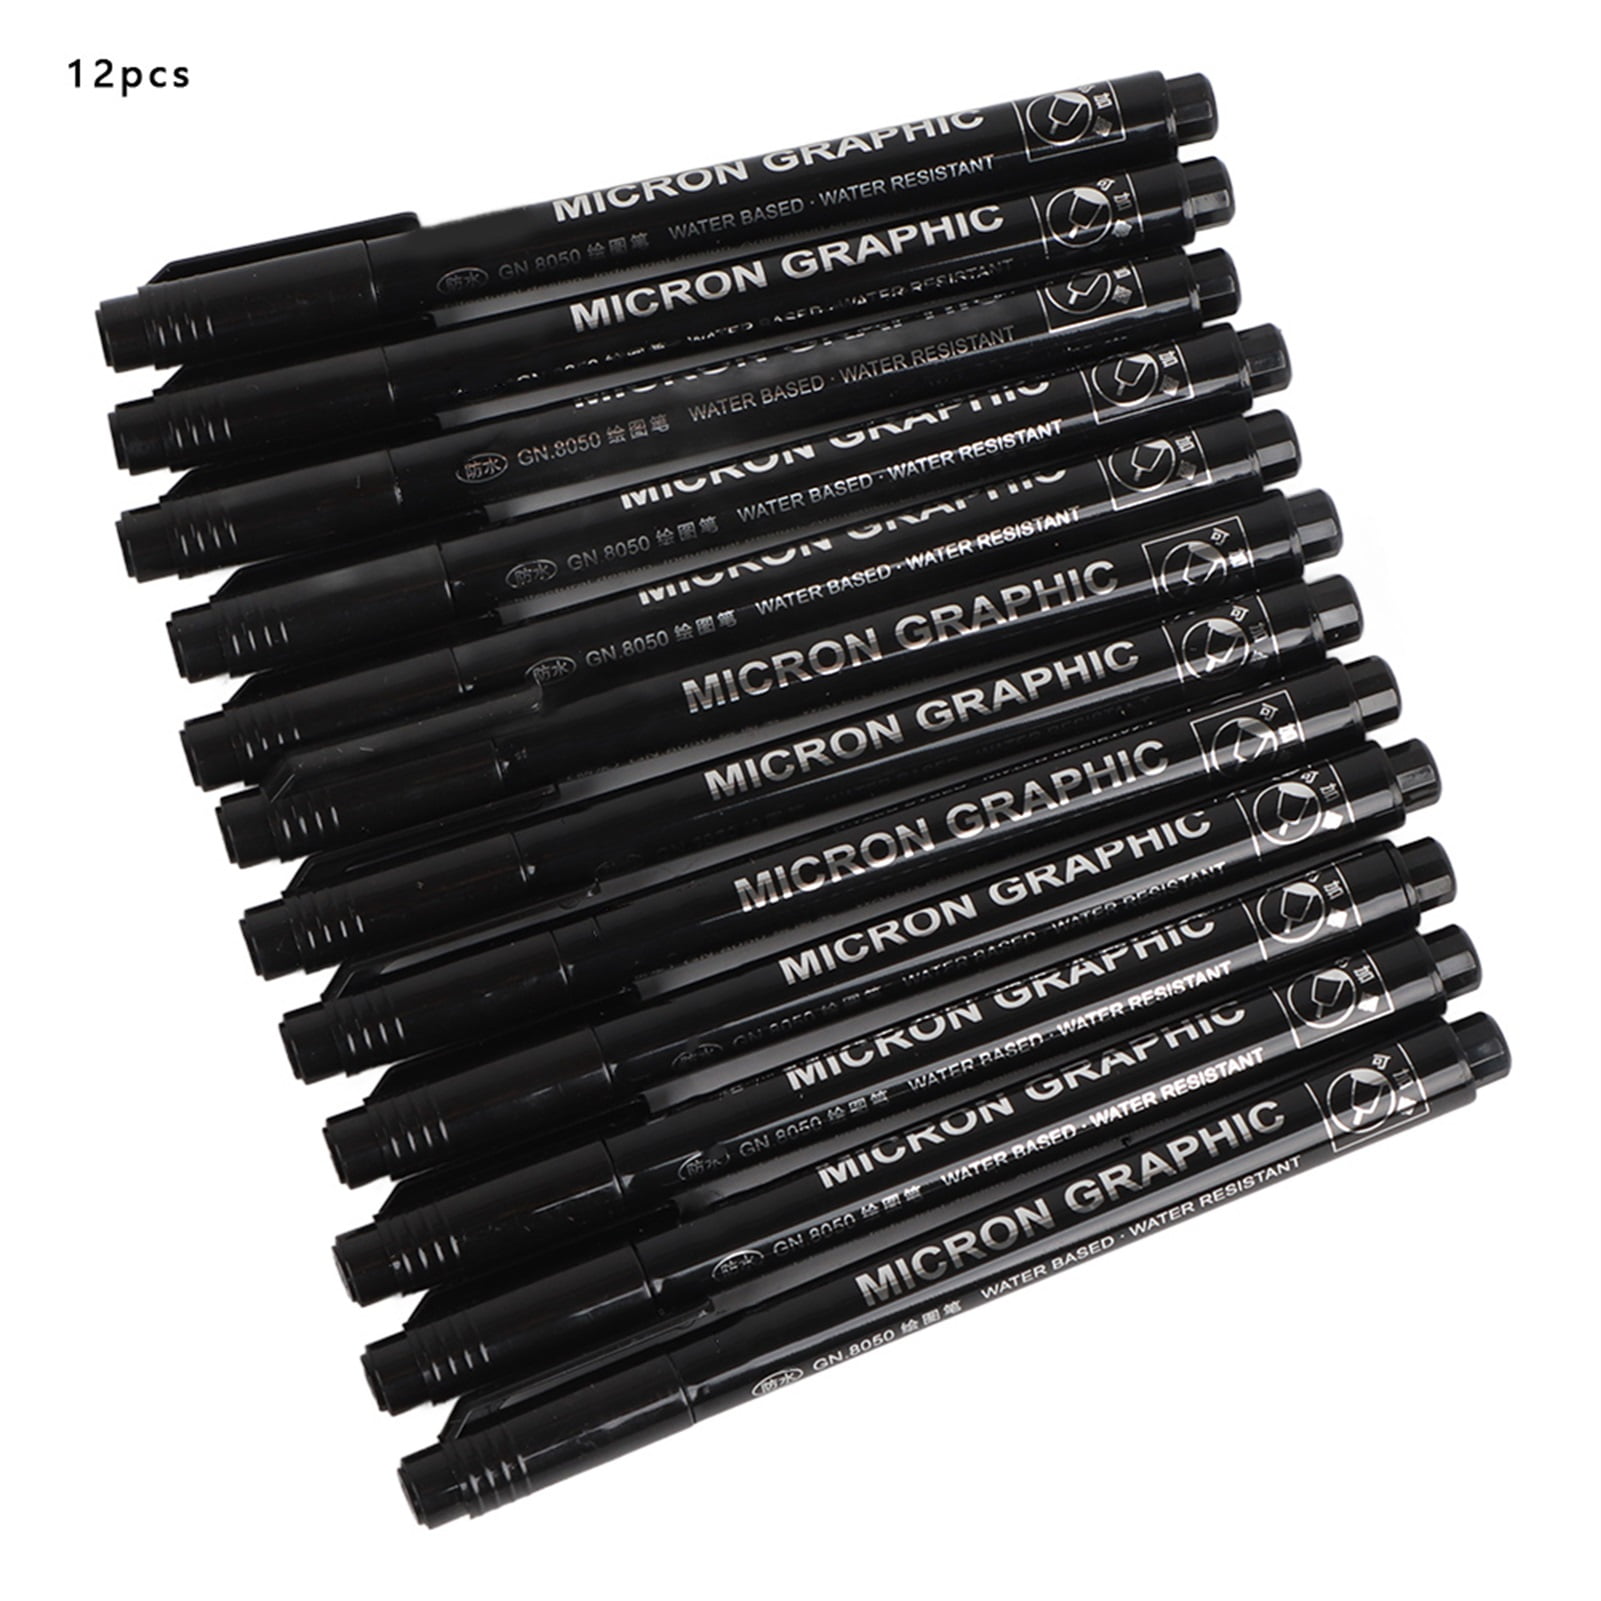 Portable Fine Liner, Drawing Fine Line Pen, Writing Fineliner, Tips Drawing  Pens Office For Writing School Marking